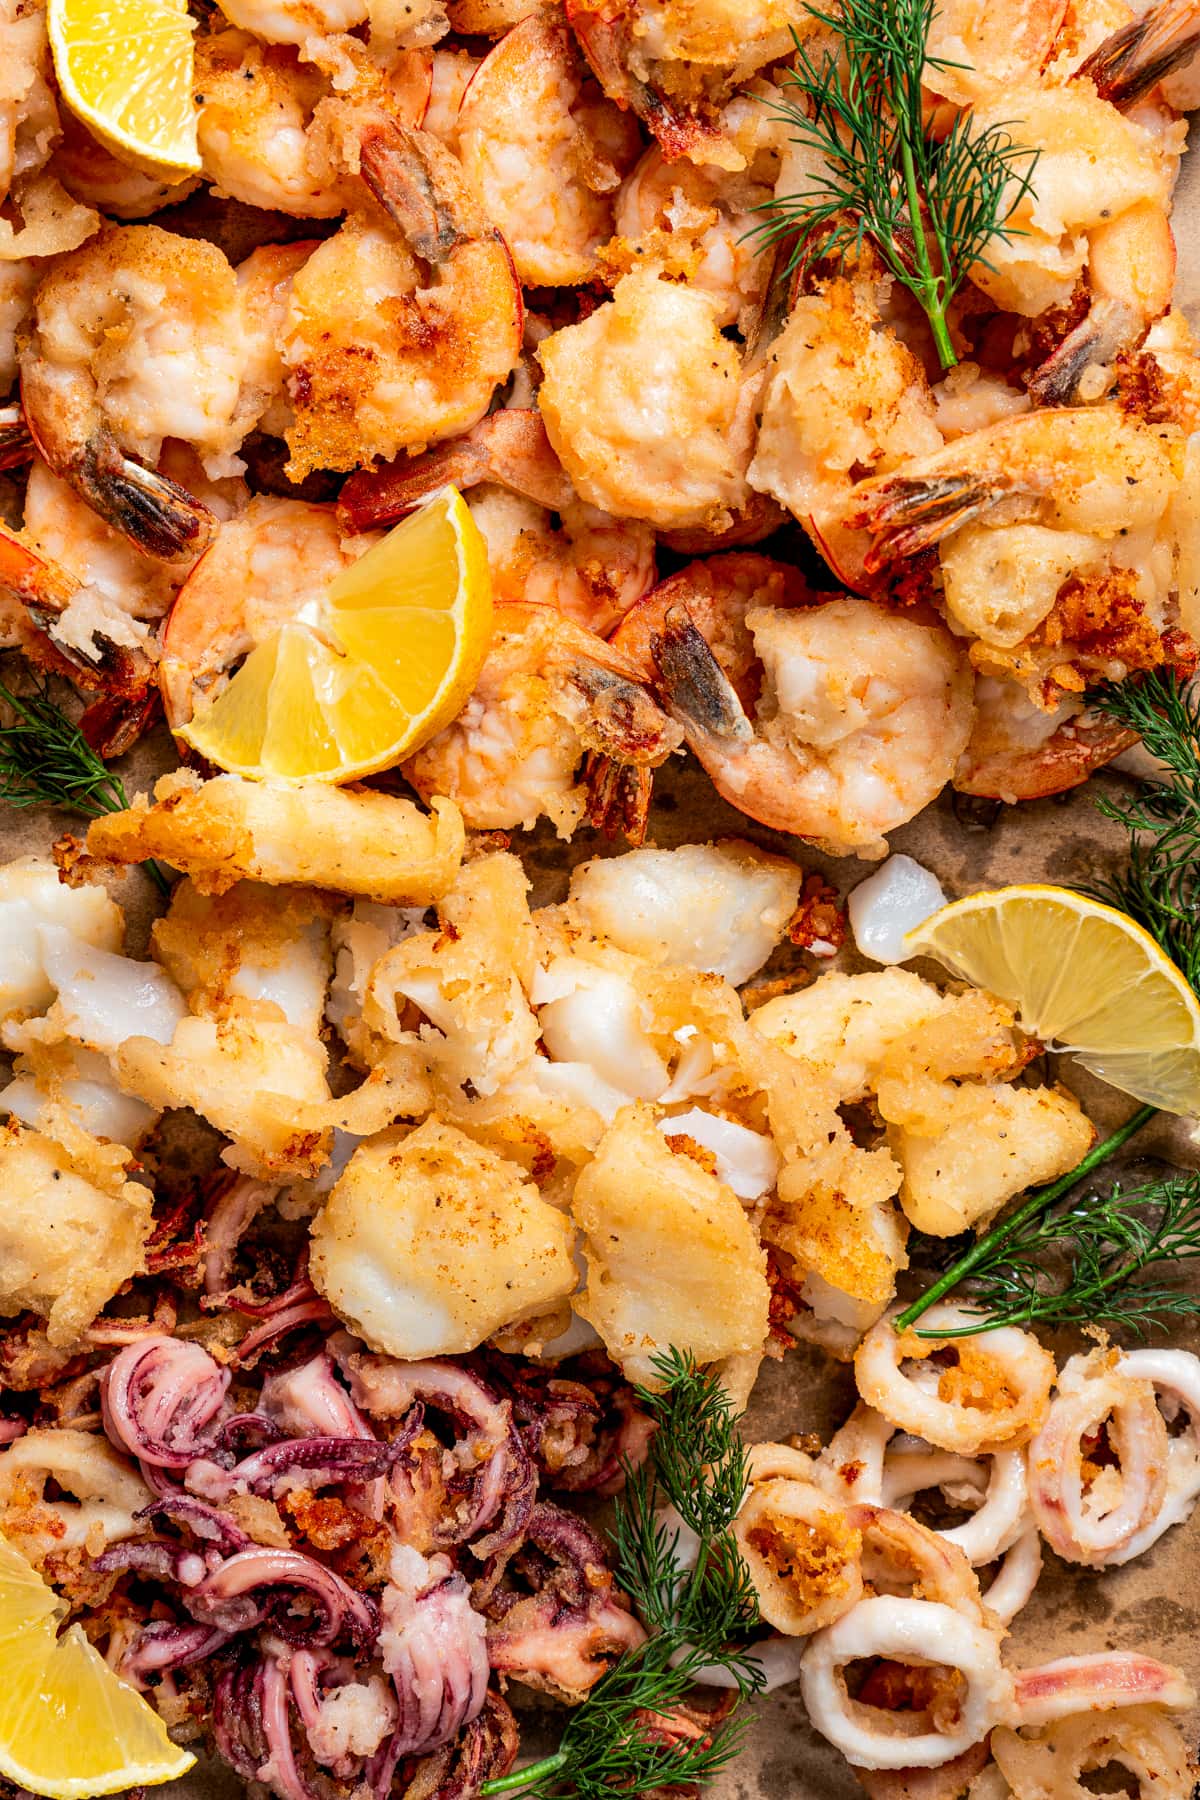 Up close image of fritto misto. A fried mix of seafood.